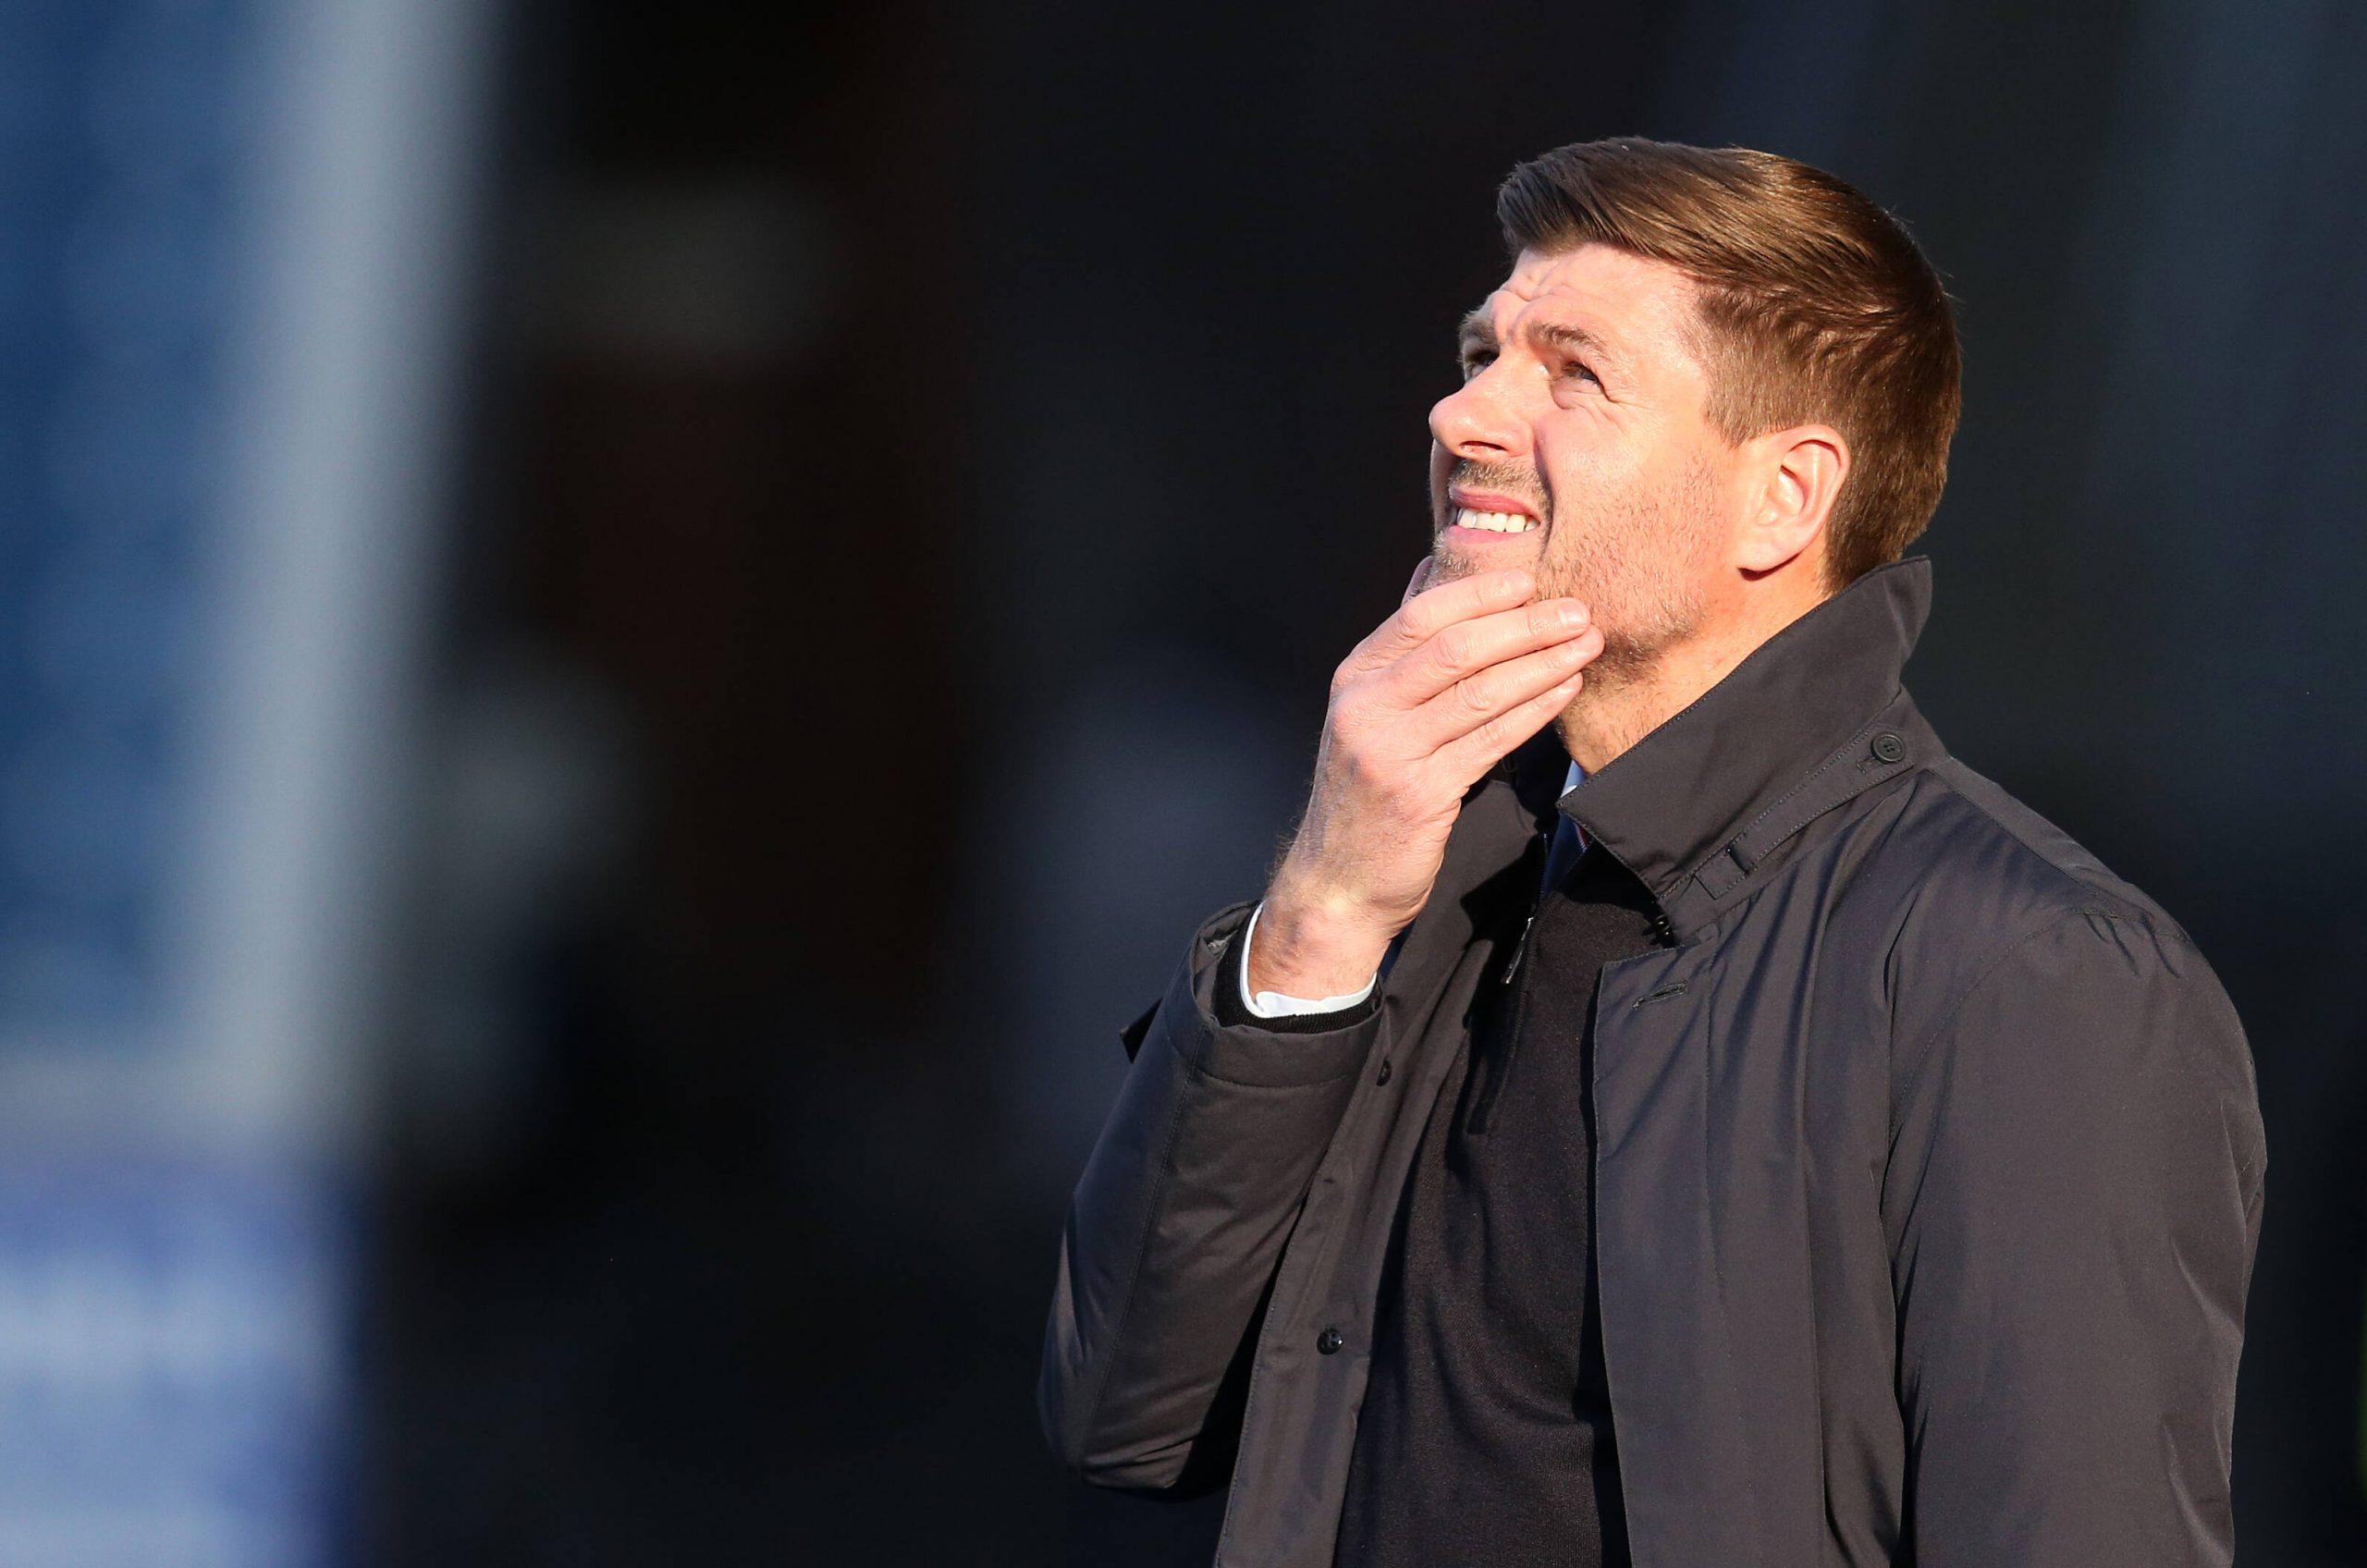 How will Stevie G negotiate the minefield of summer 21